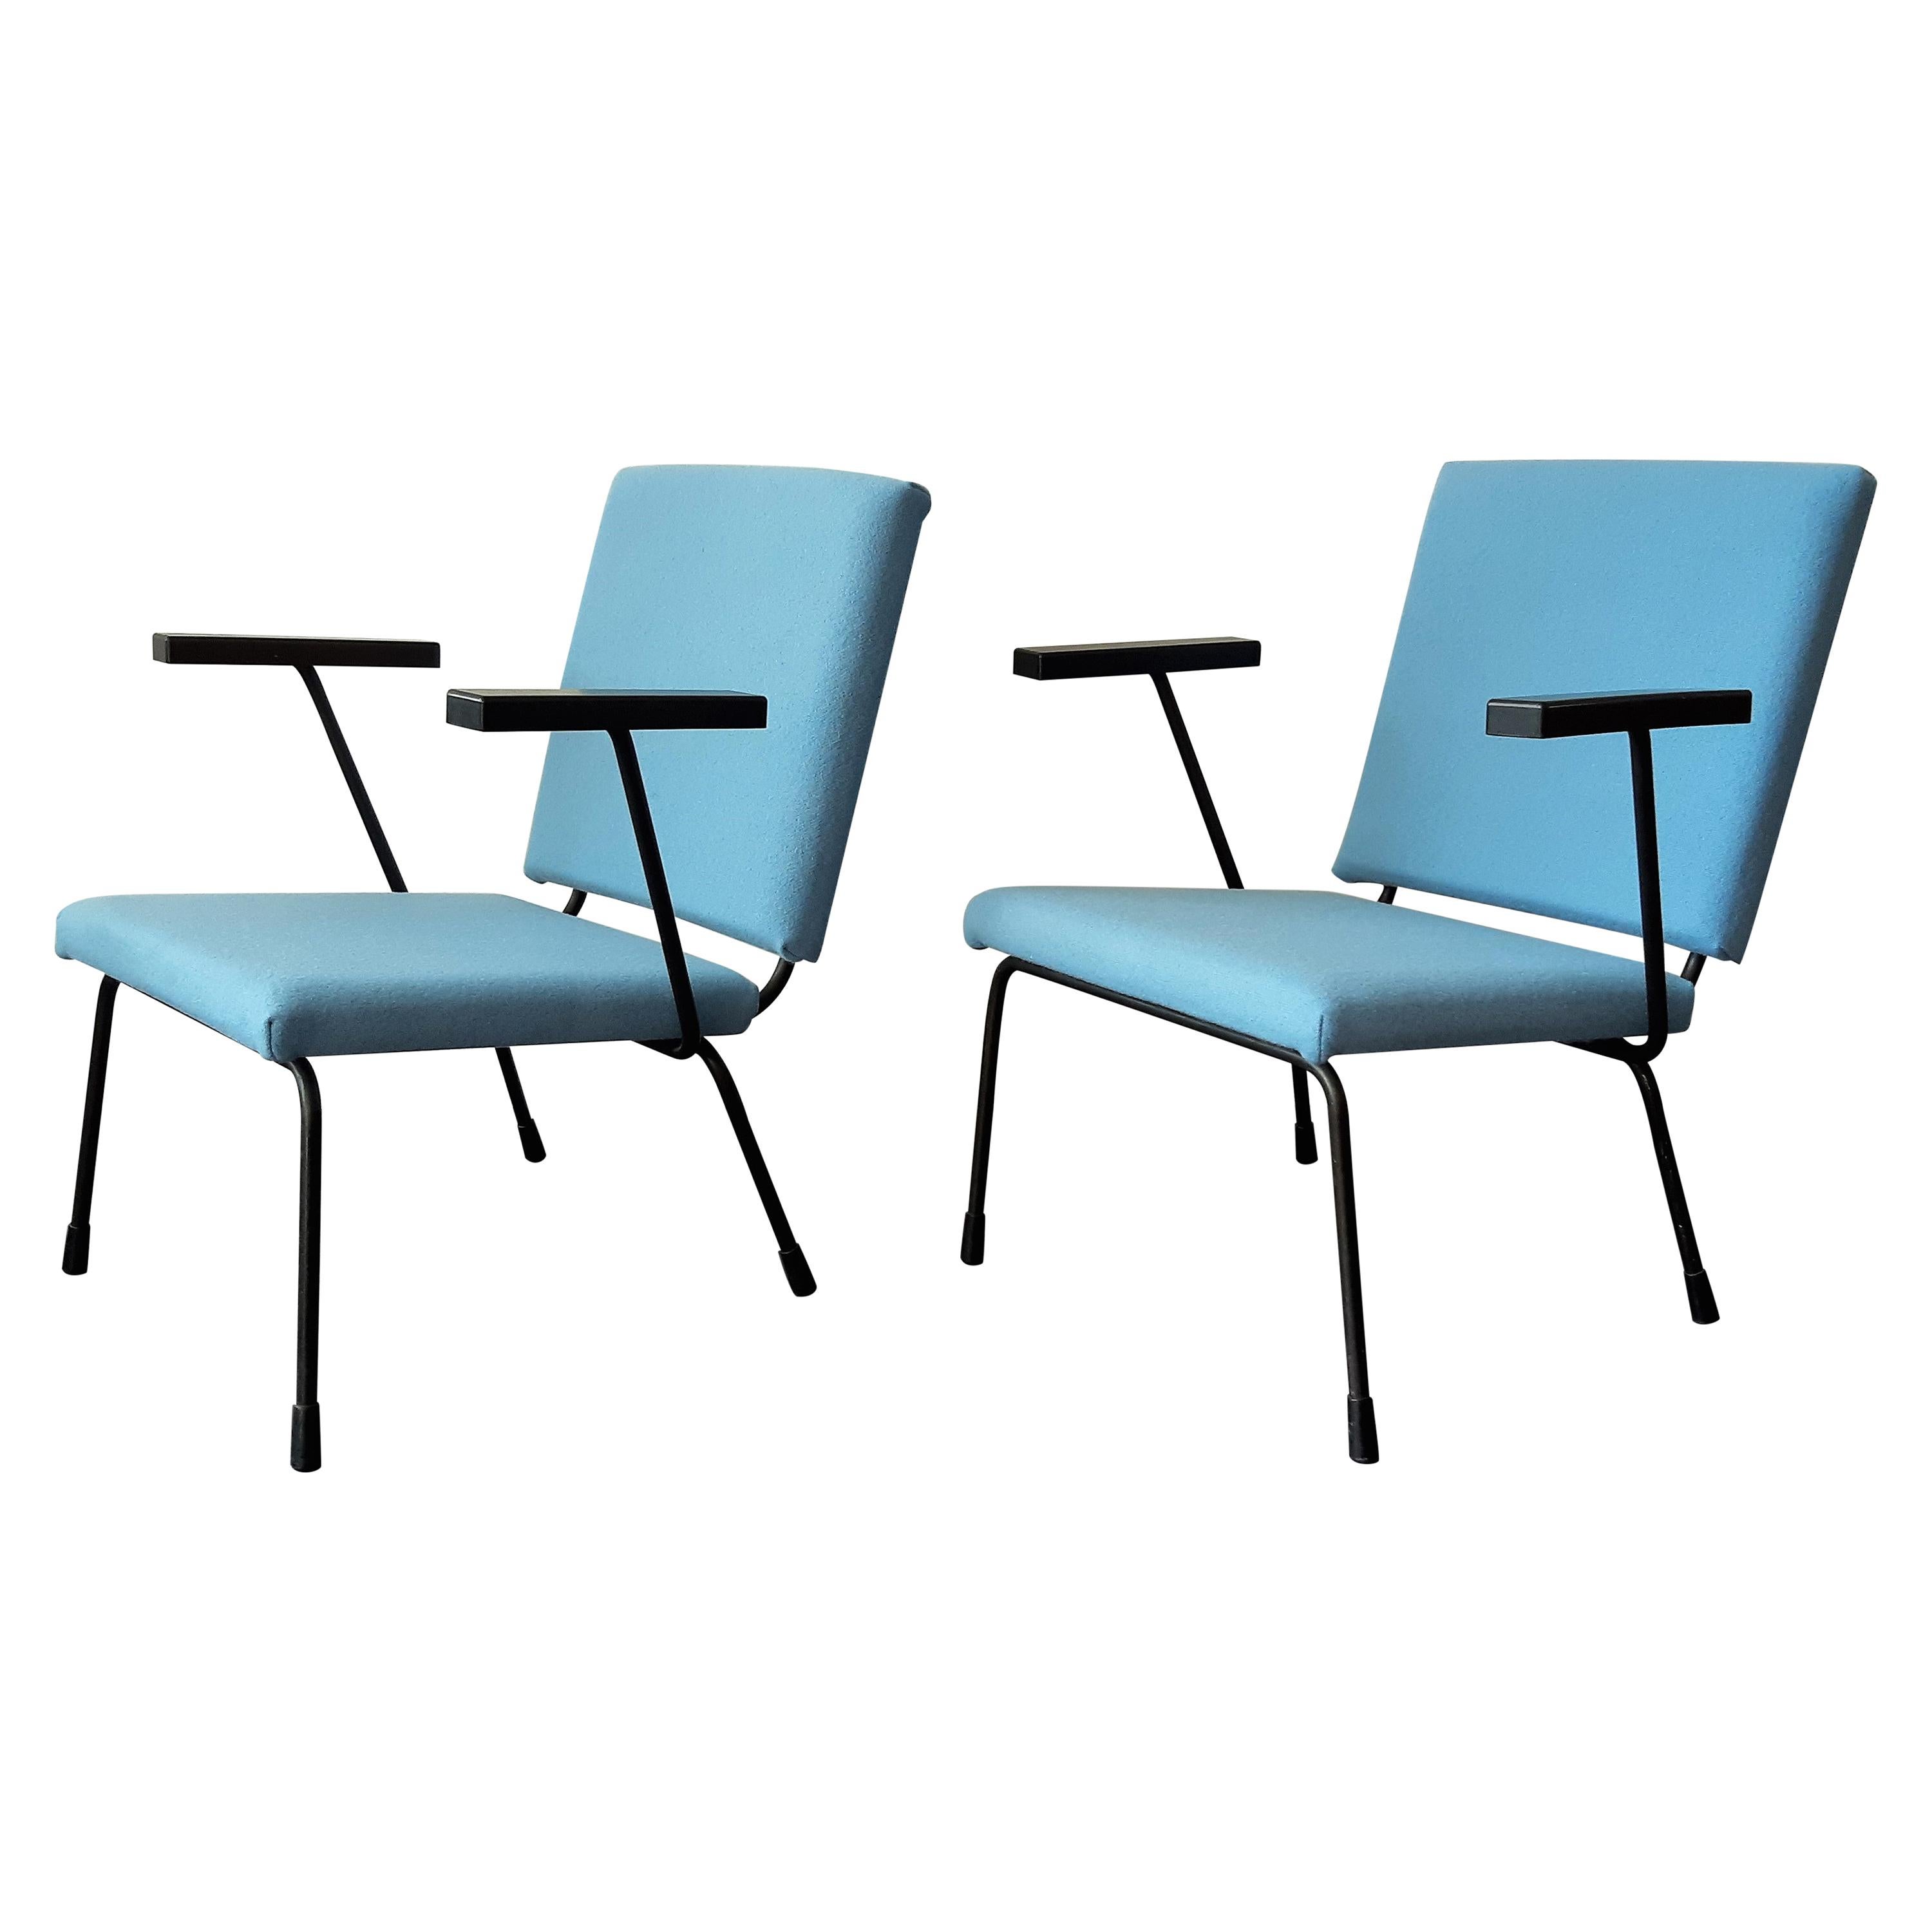 Set of 2 '415' Lounge Chairs by Wim Rietveld for Gispen, The Netherlands 1950's